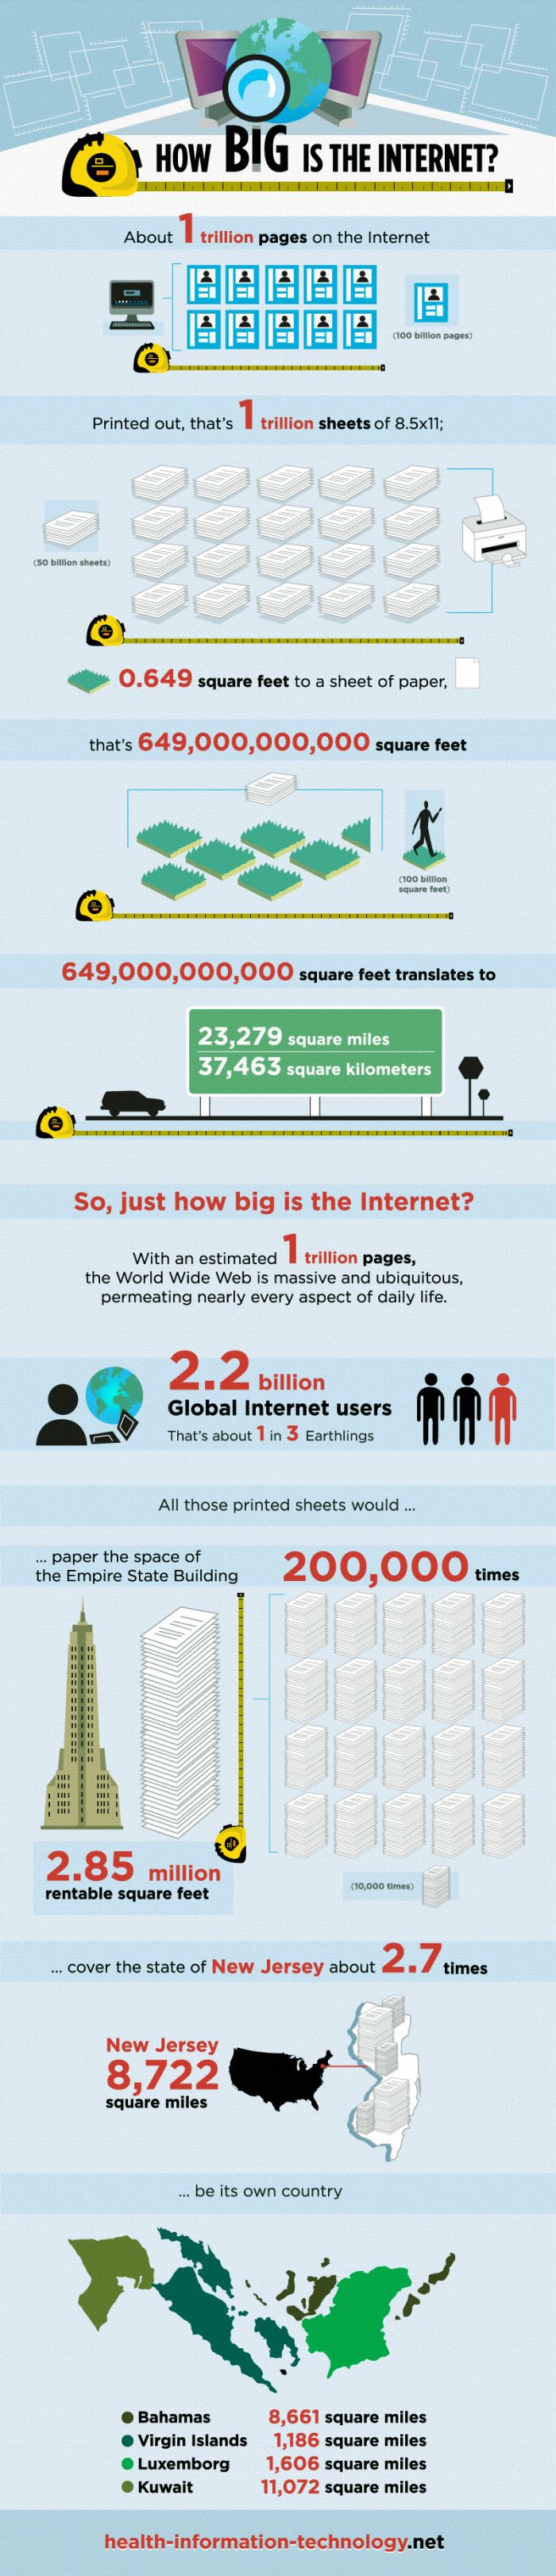 The Size of the Internet (infographic)